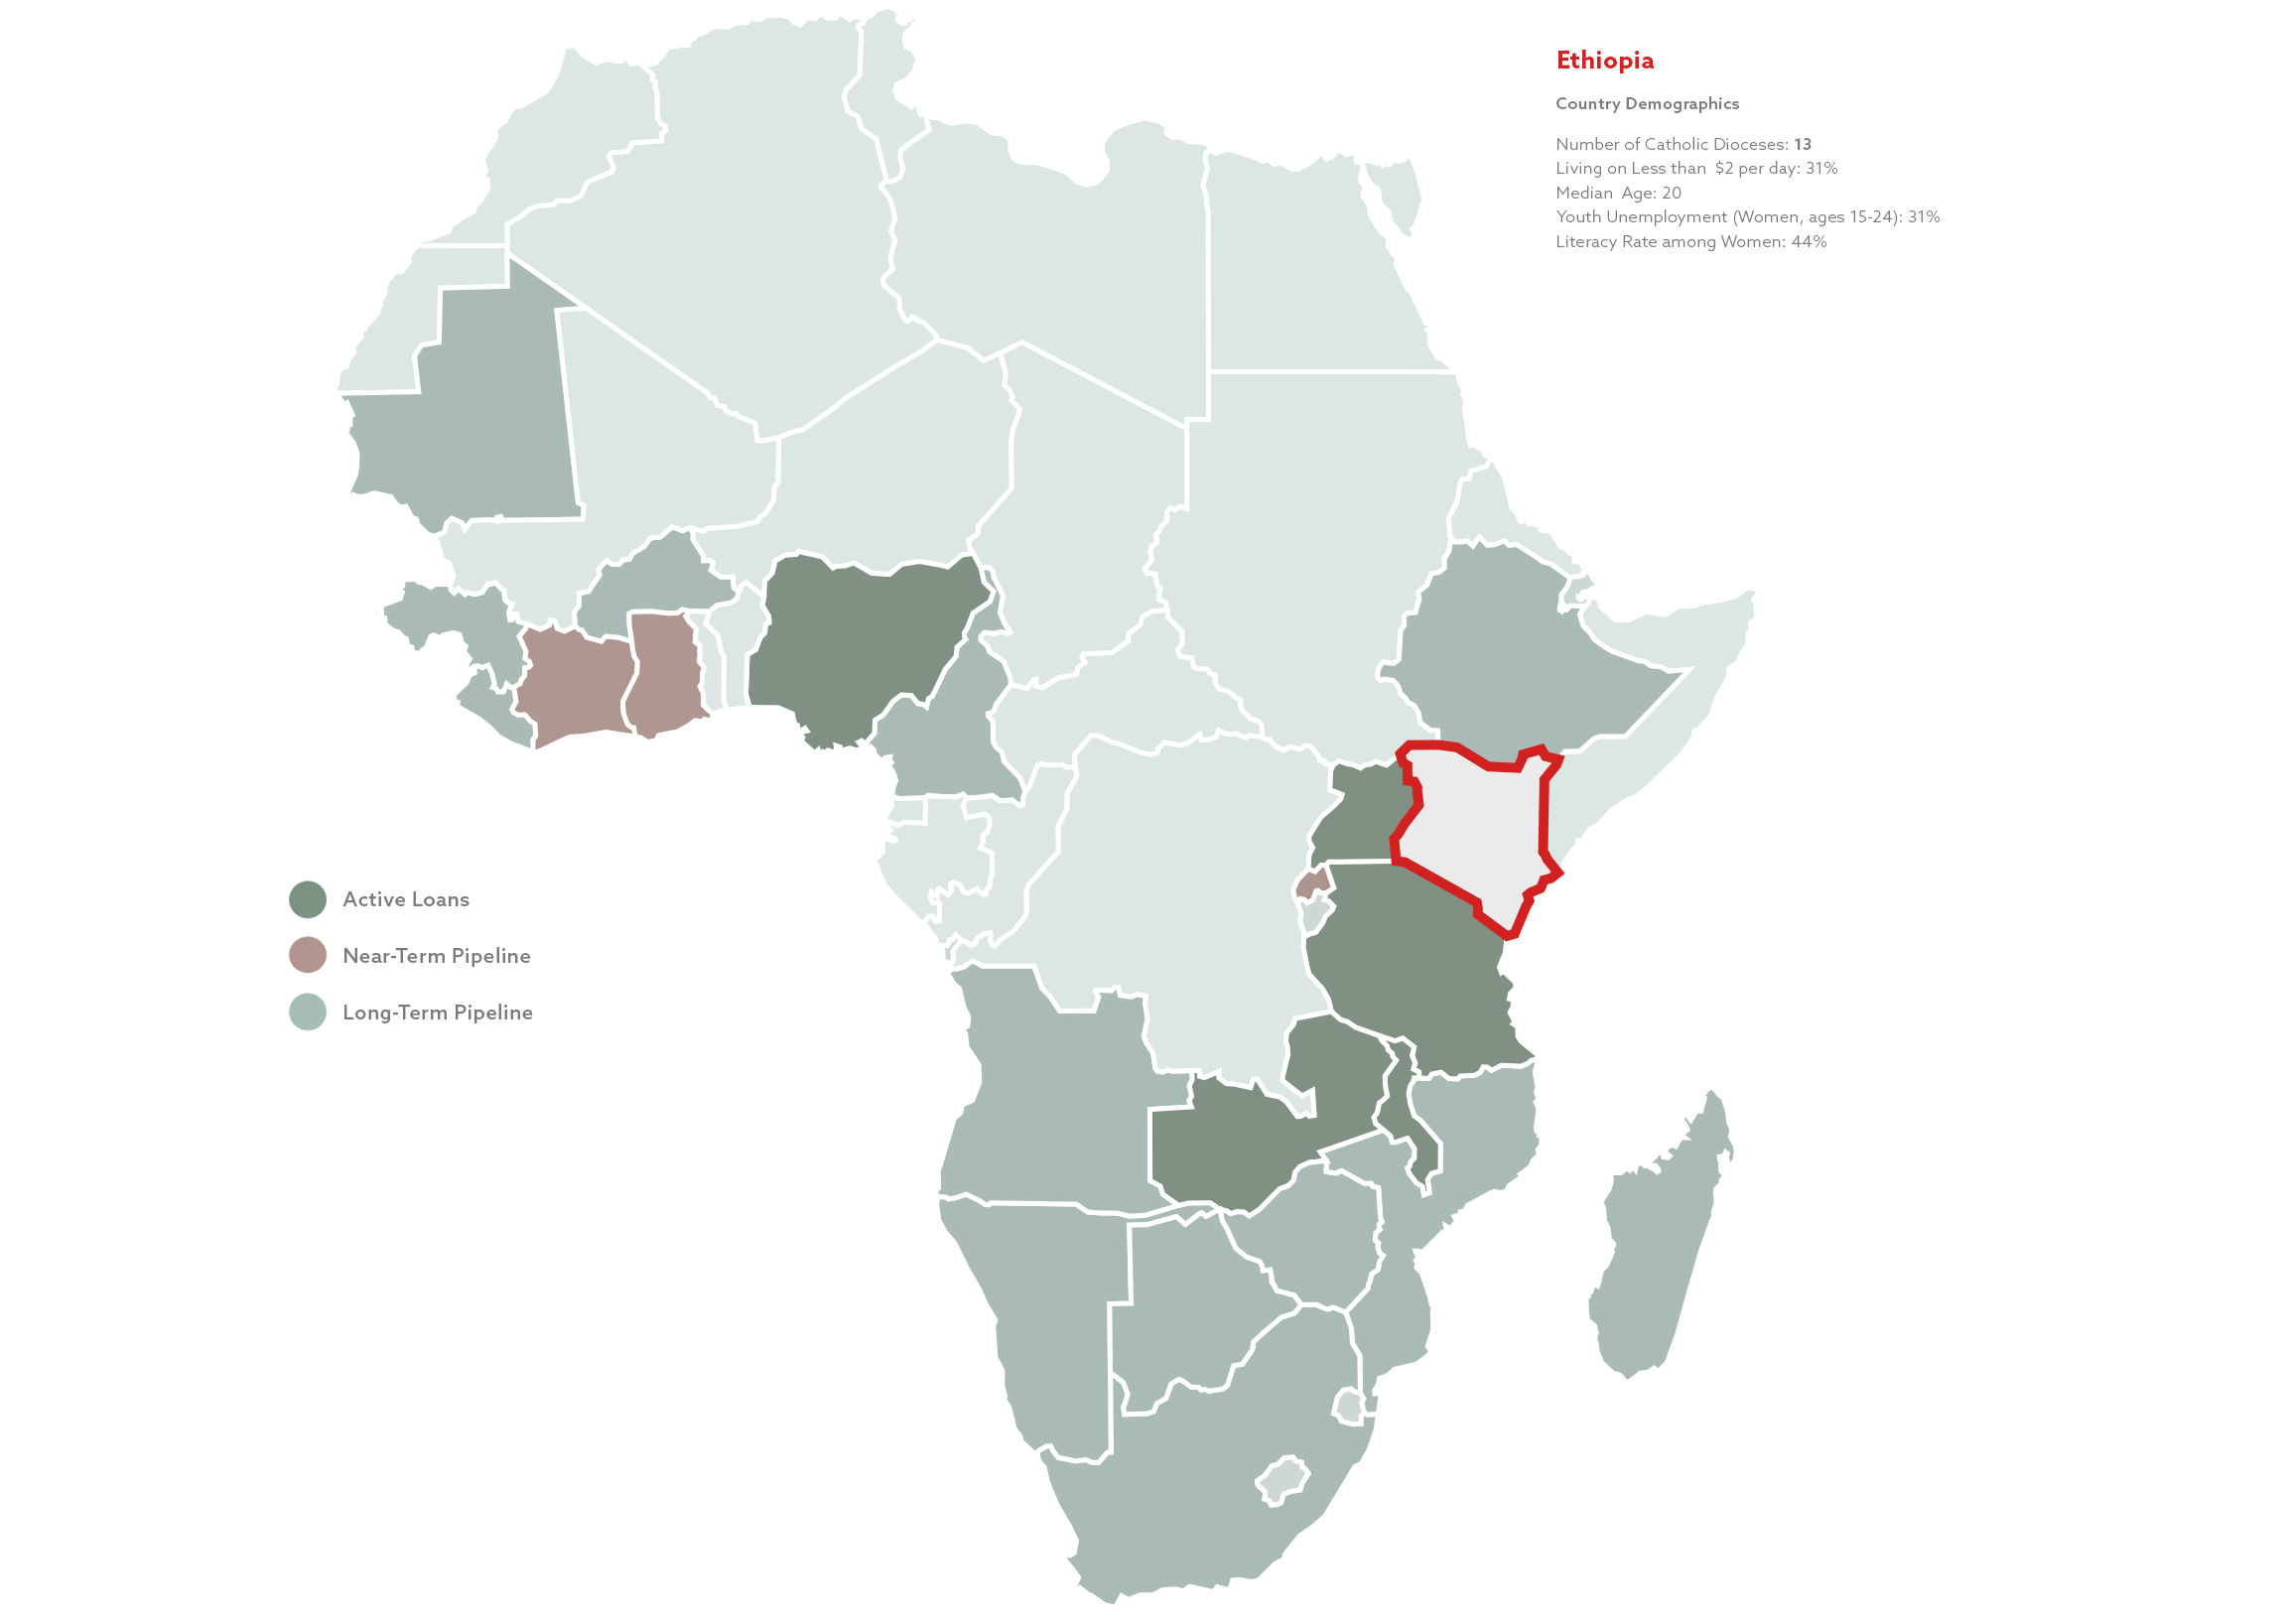 Interactive graphic map of Africa created to show the breakdown of the Missio Invest loans in various countries.